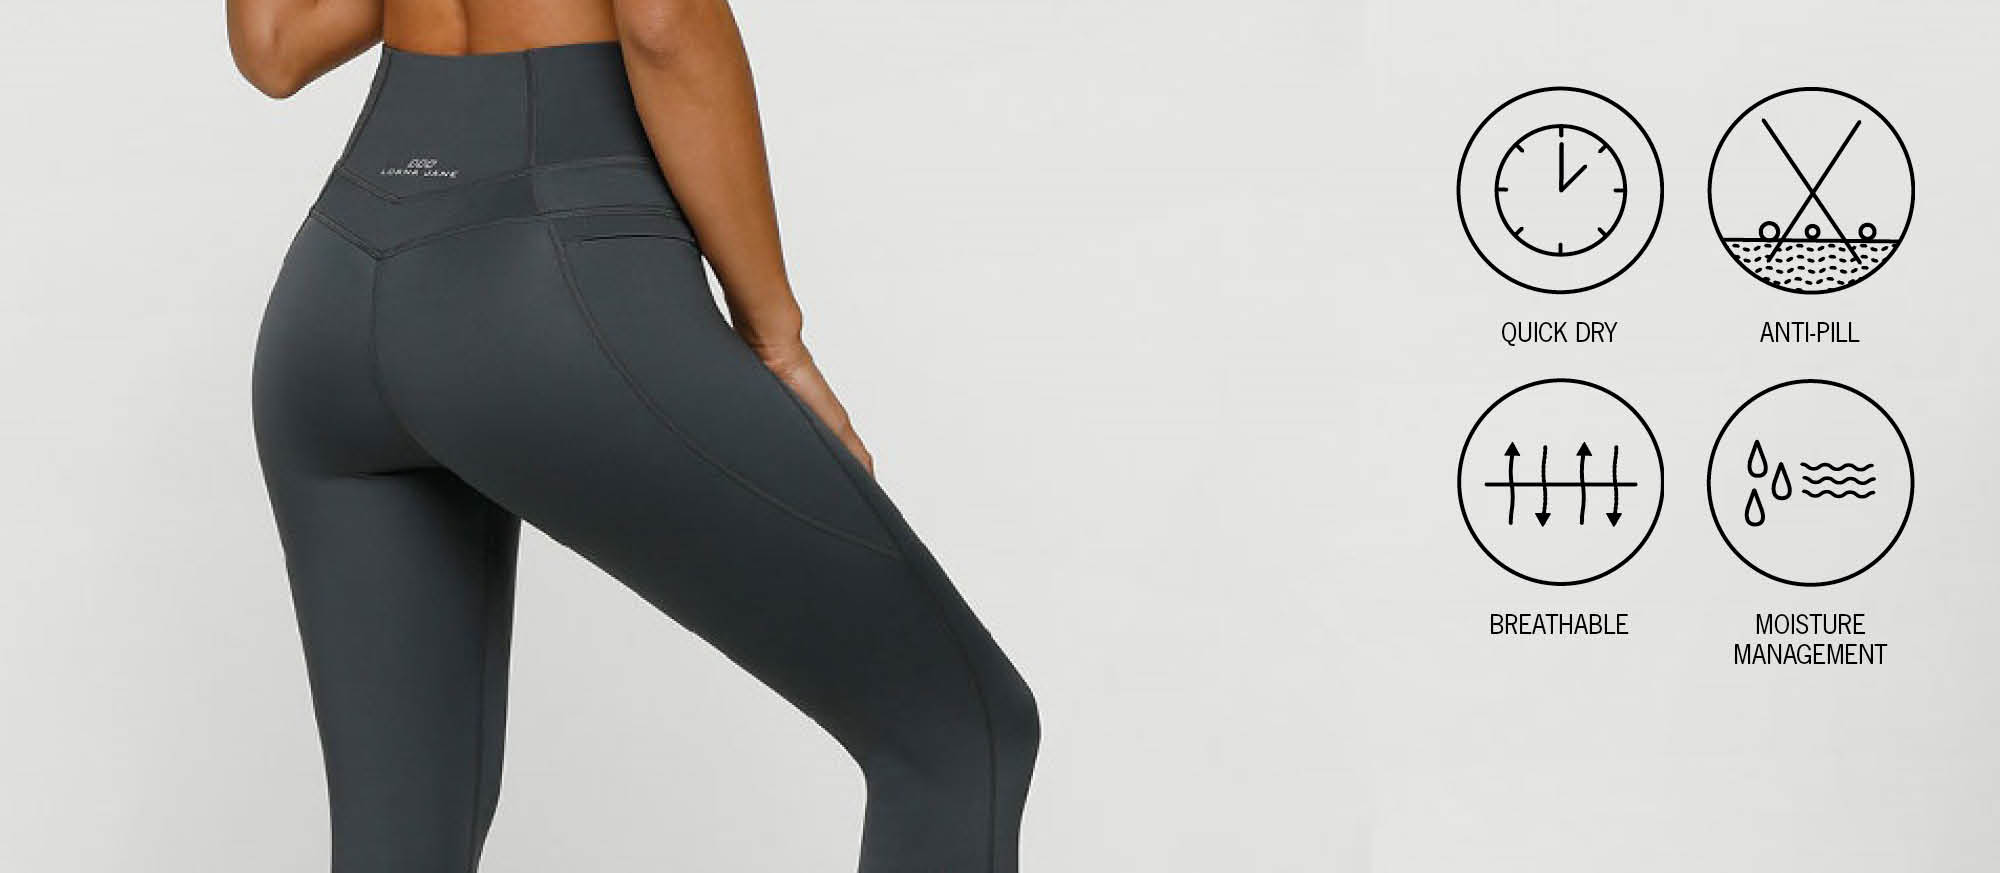 Lorna Jane CoolCore fabric. Quick dry, moisture wicking and breathable, anti-pill.